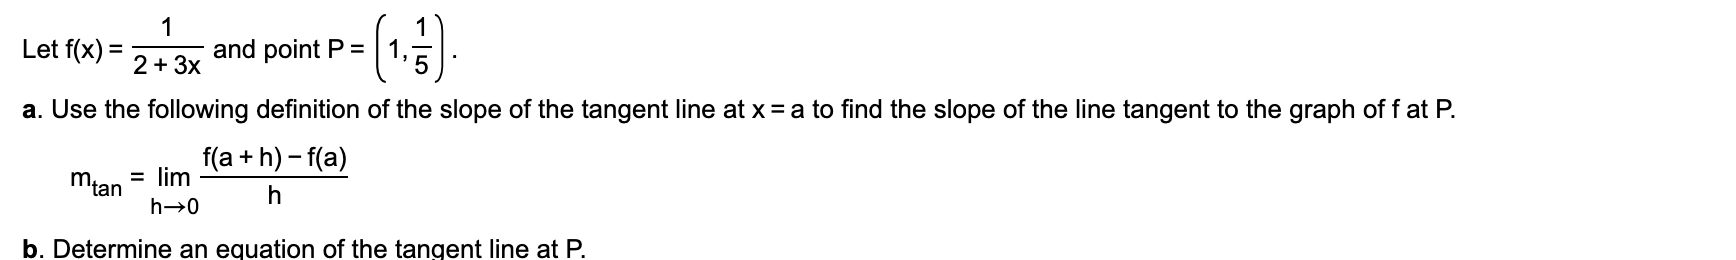 Let f(x) =
and point P =
%D
2 + 3x
a. Use the following definition of the slope of the tangent line at x = a to find the slope of the line tangent to the graph of f at P.
f(a + h) - f(a)
= lim
Mian
b. Determine an equation of the tangent line at P.
-|5
